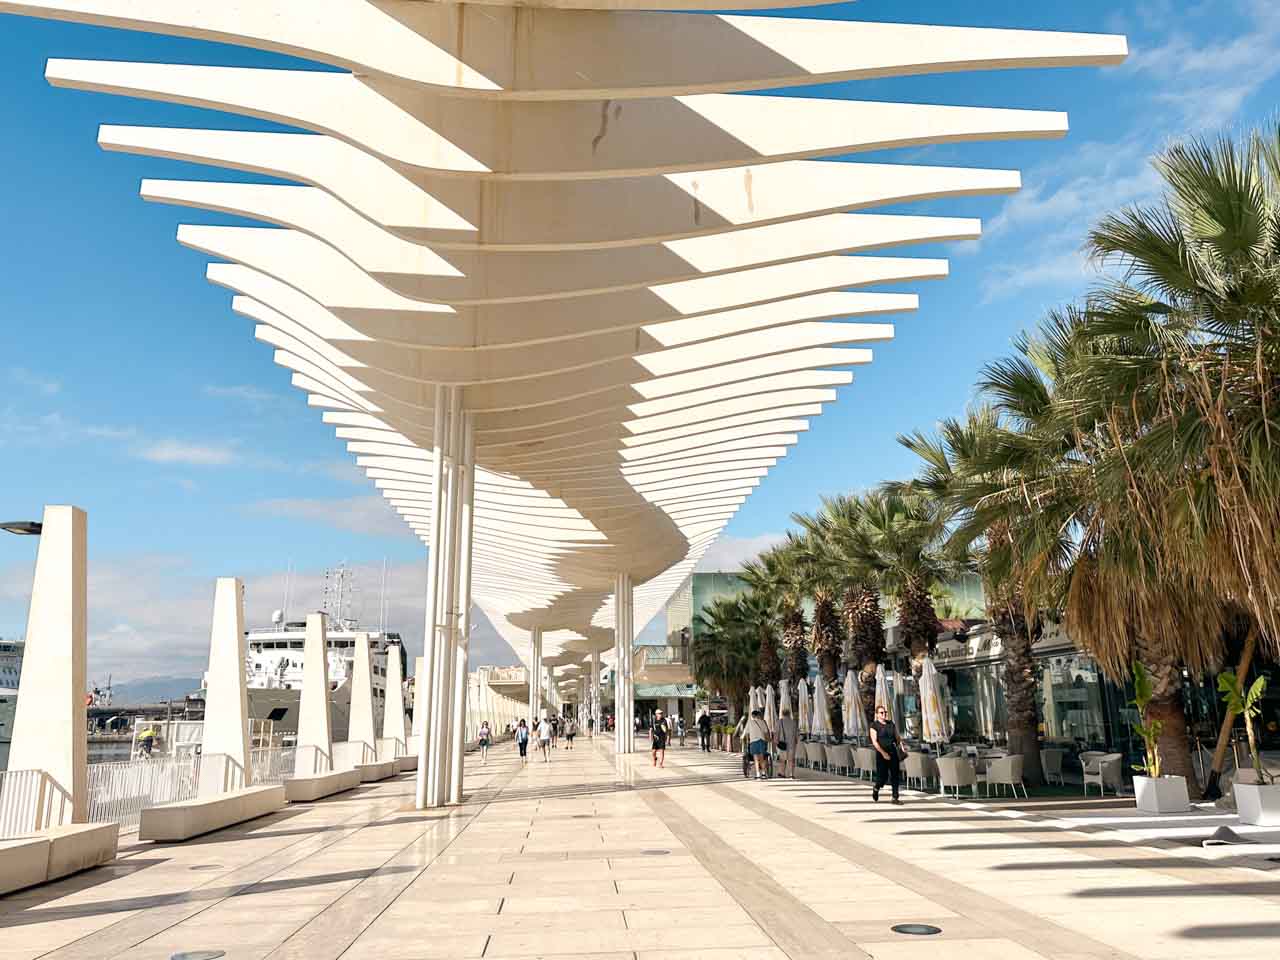 A modern, white wave-like structure on the Muelle Uno promenade in Malaga, Spain